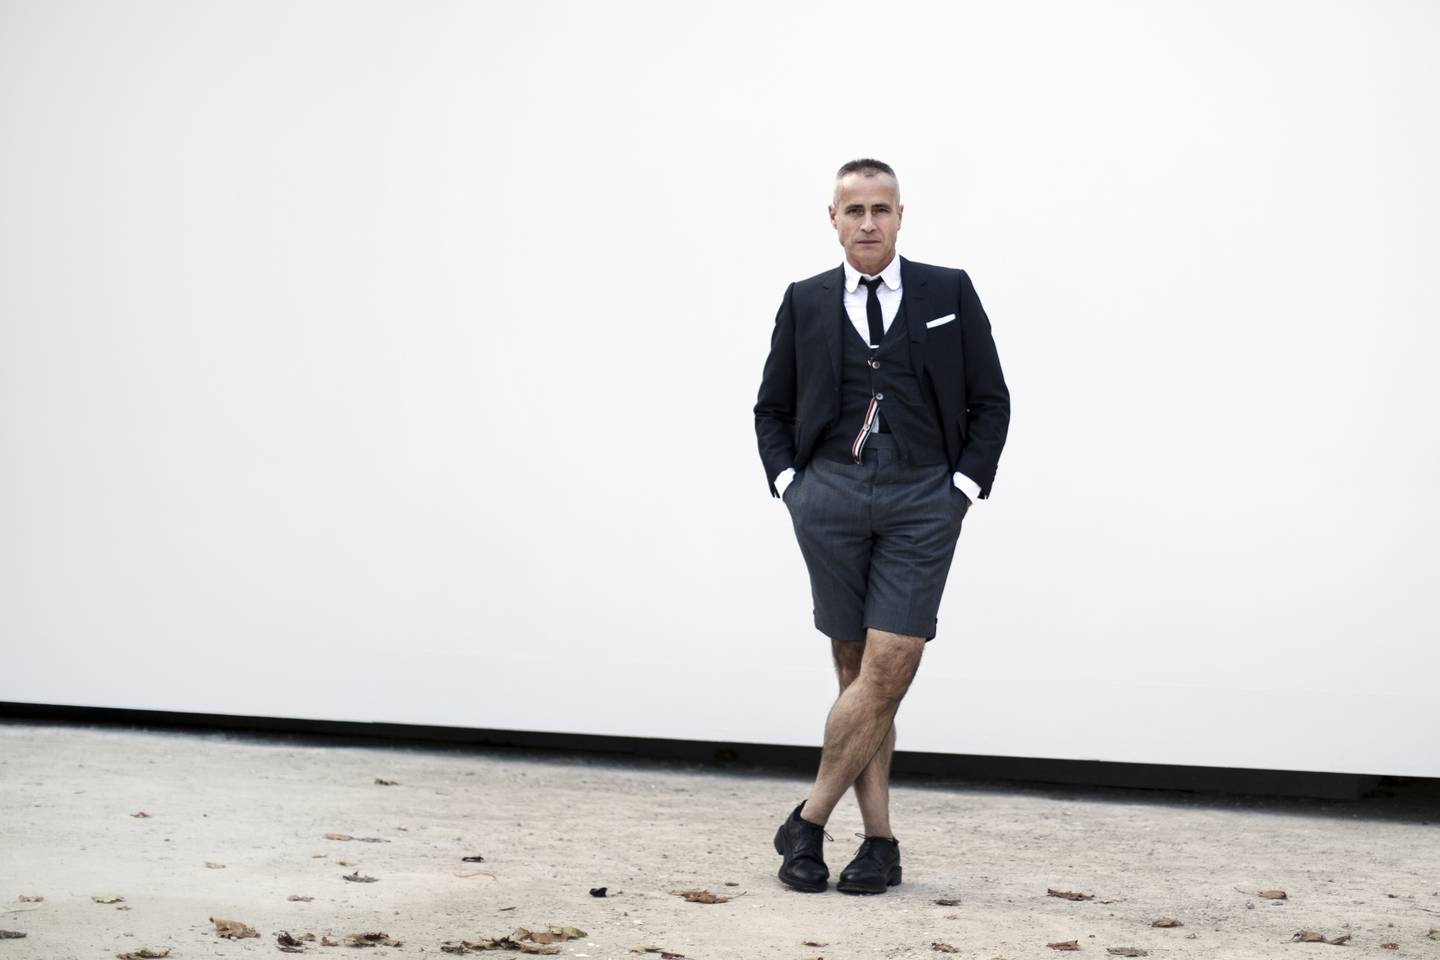 Thom Browne will begin his post as chairman of the Council of Fashion Designers of America in January 2023.